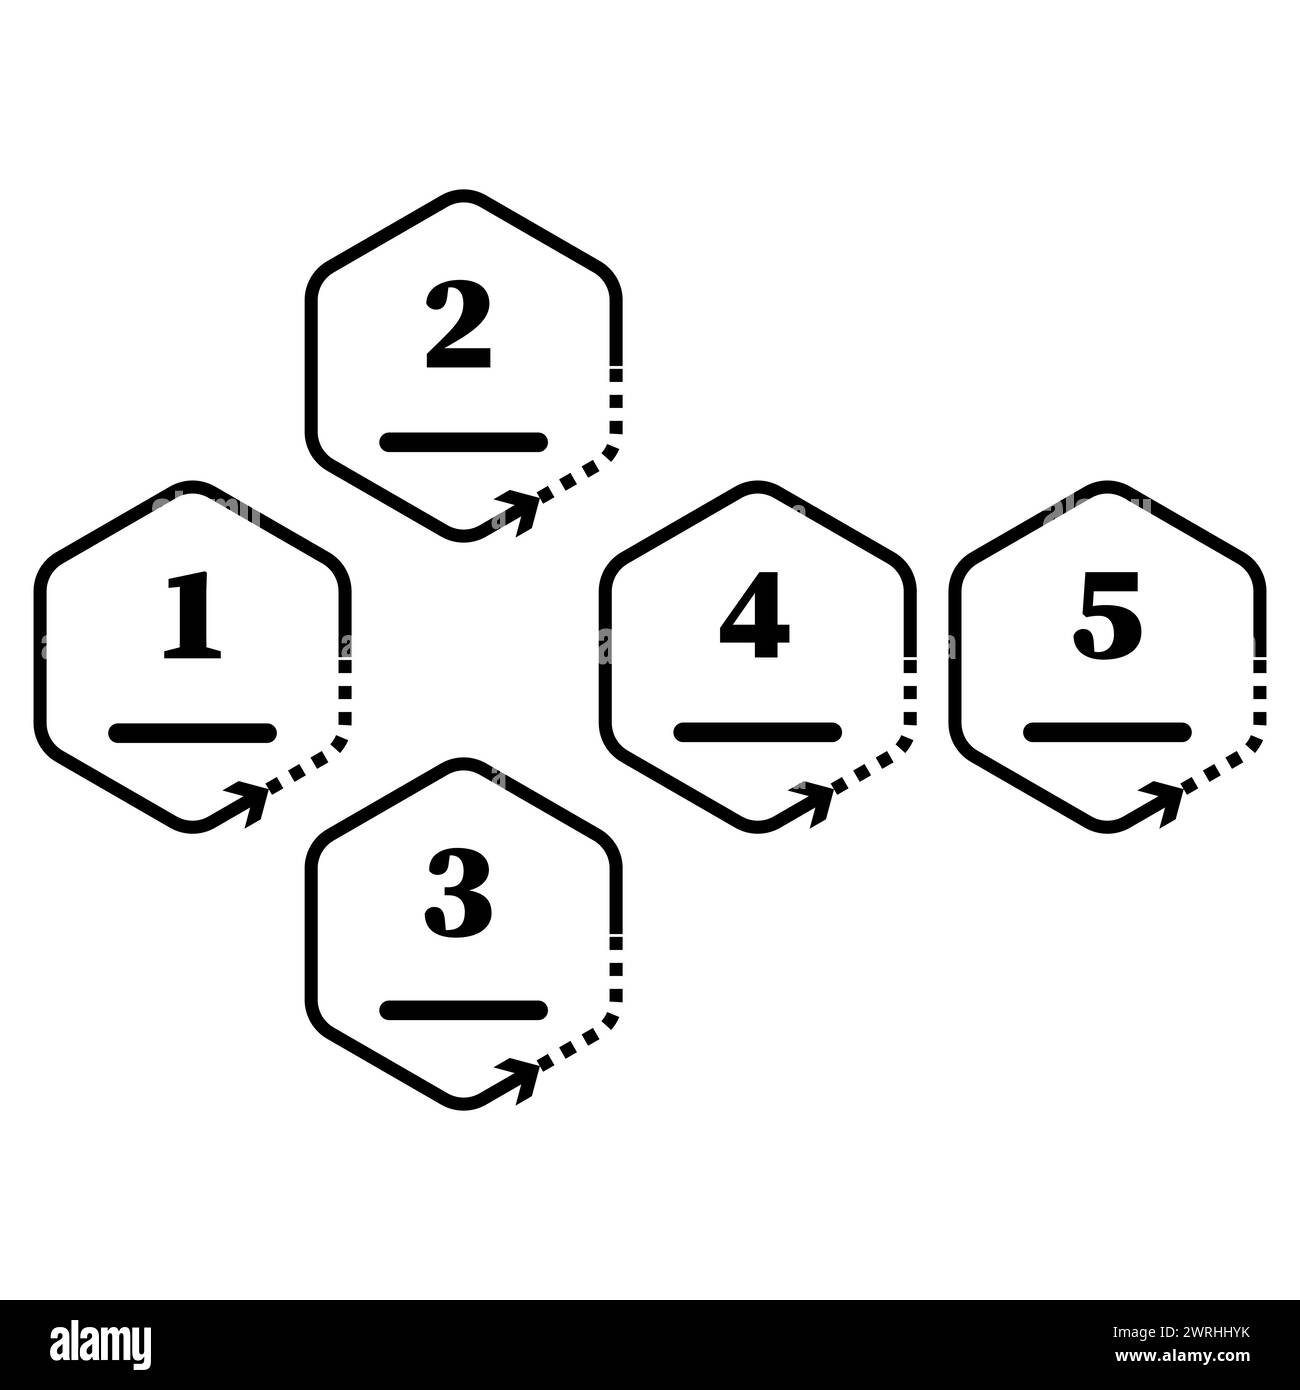 Numbered hexagon sequence. Workflow directional arrows. Process planning diagram. Vector illustration. EPS 10. Stock Vector